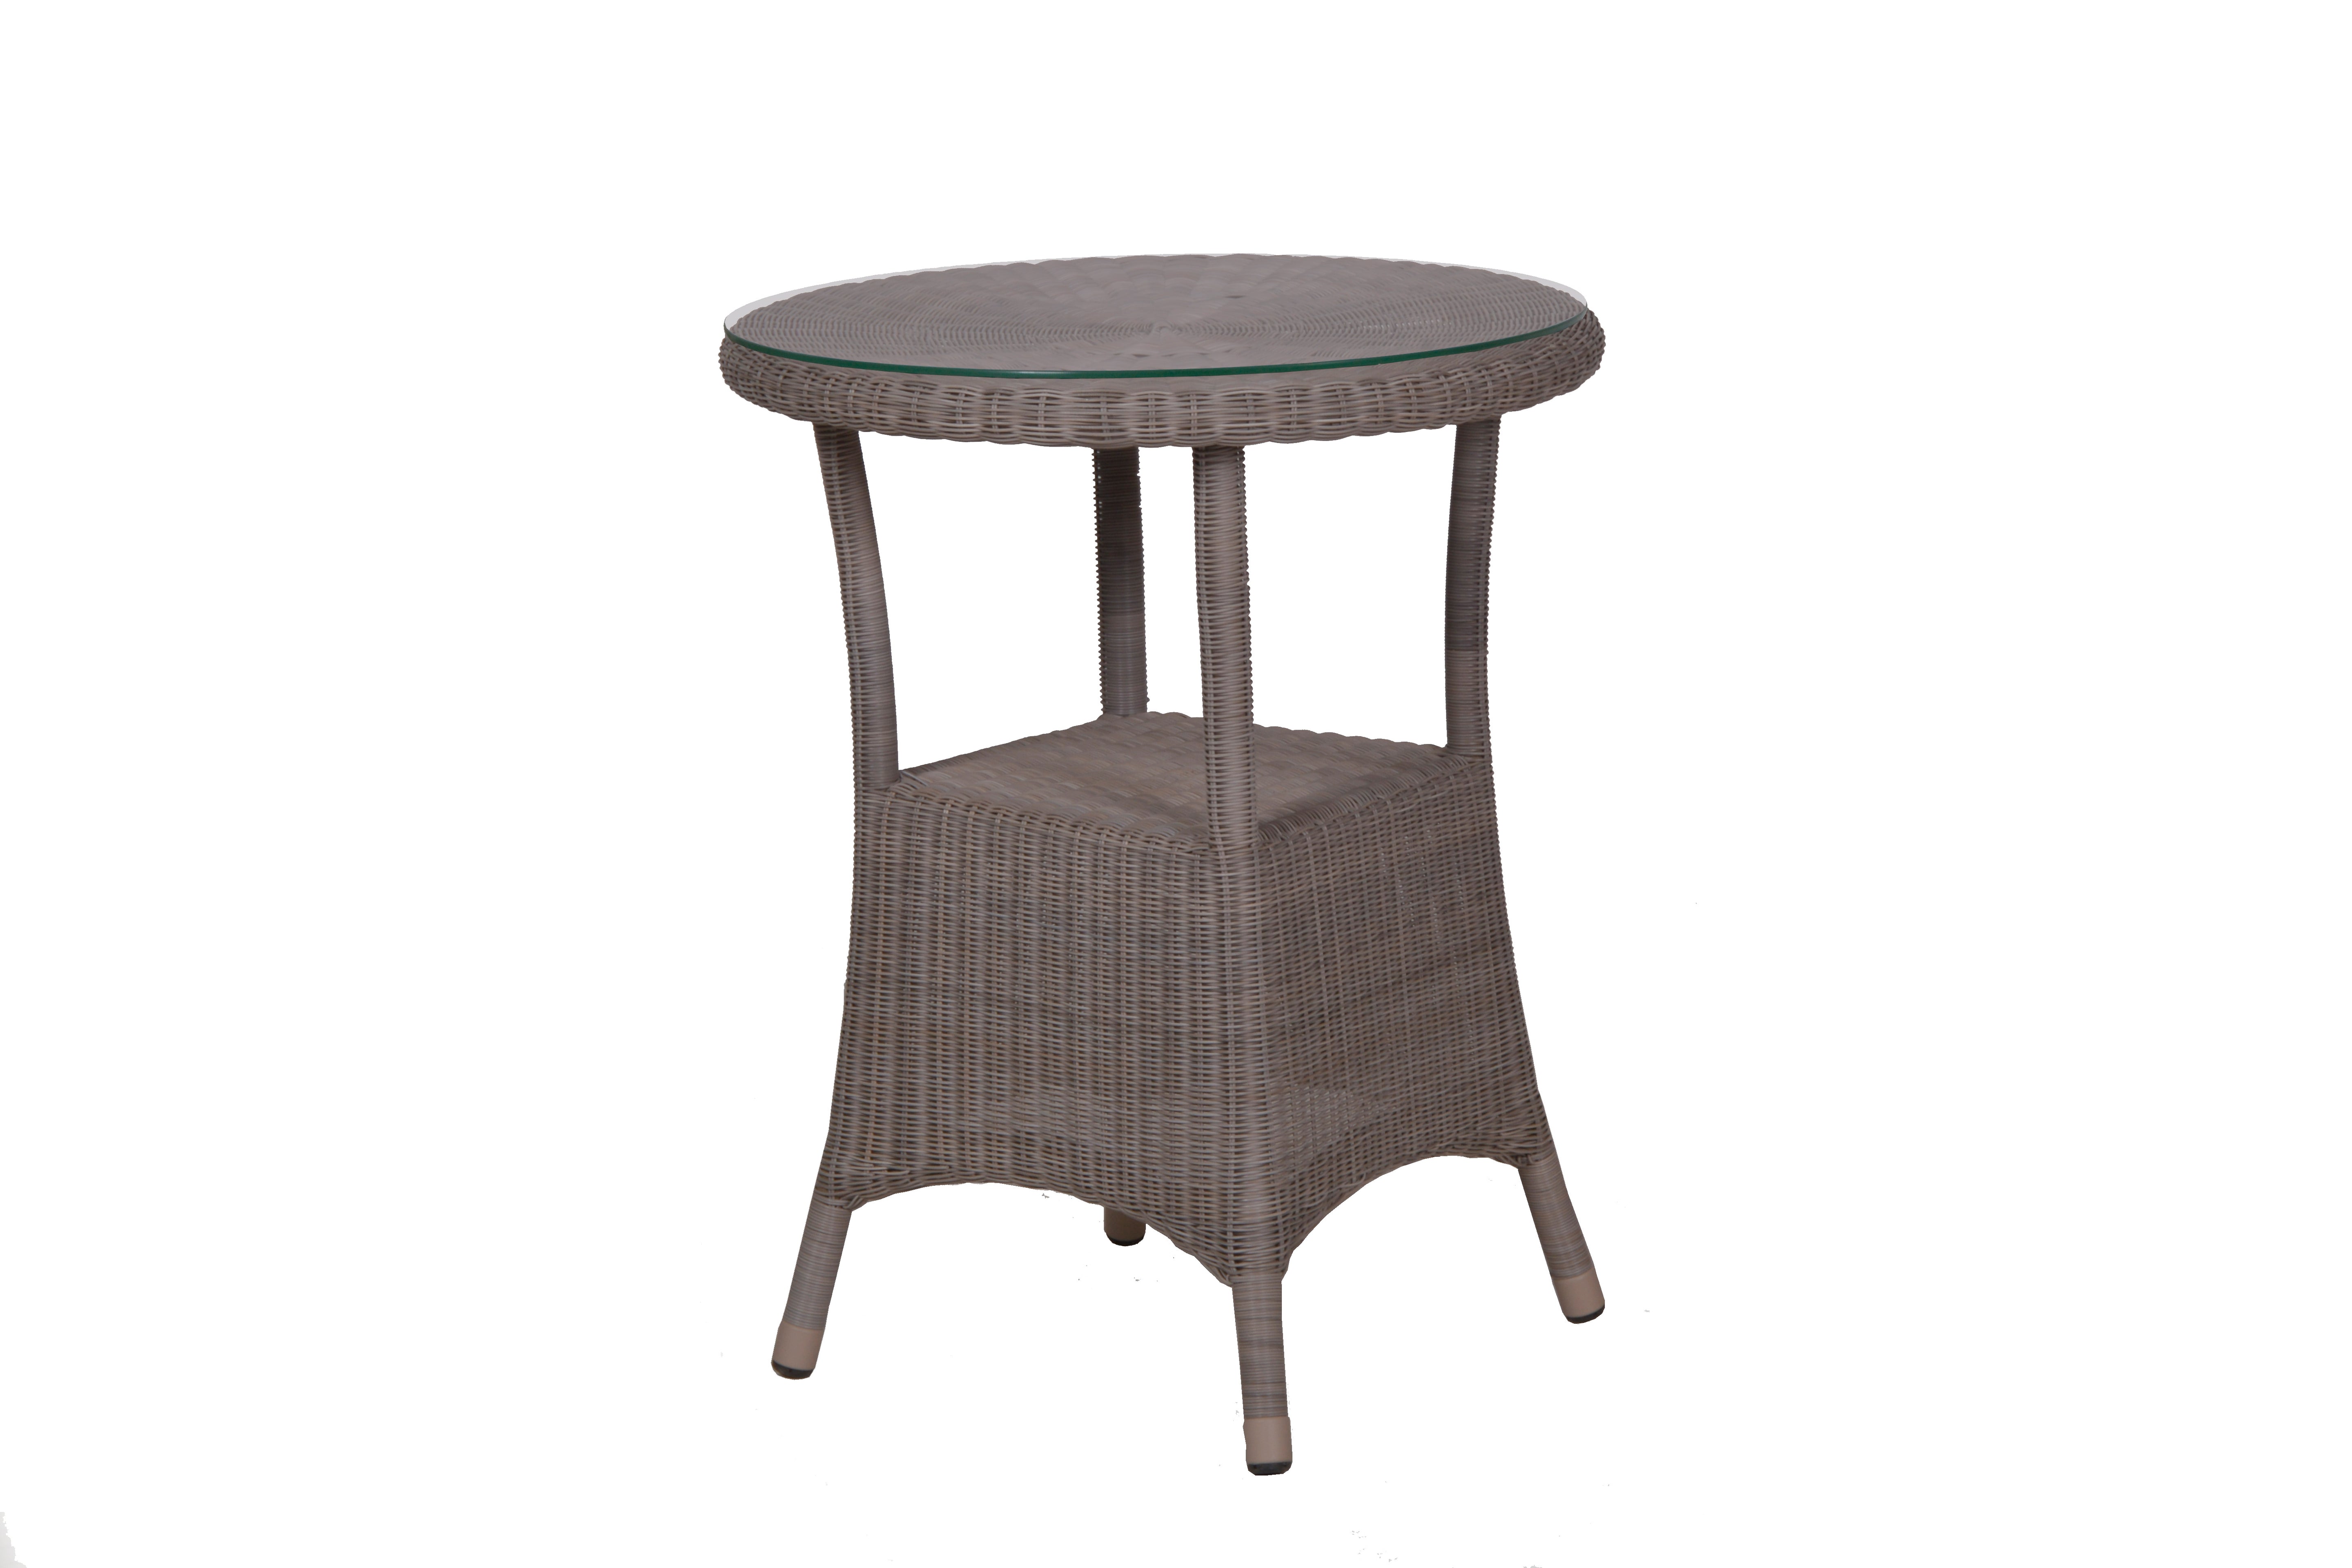 4 Seasons Outdoor Sussex Bistro Table 60cm Ø 72cm High+ Glass